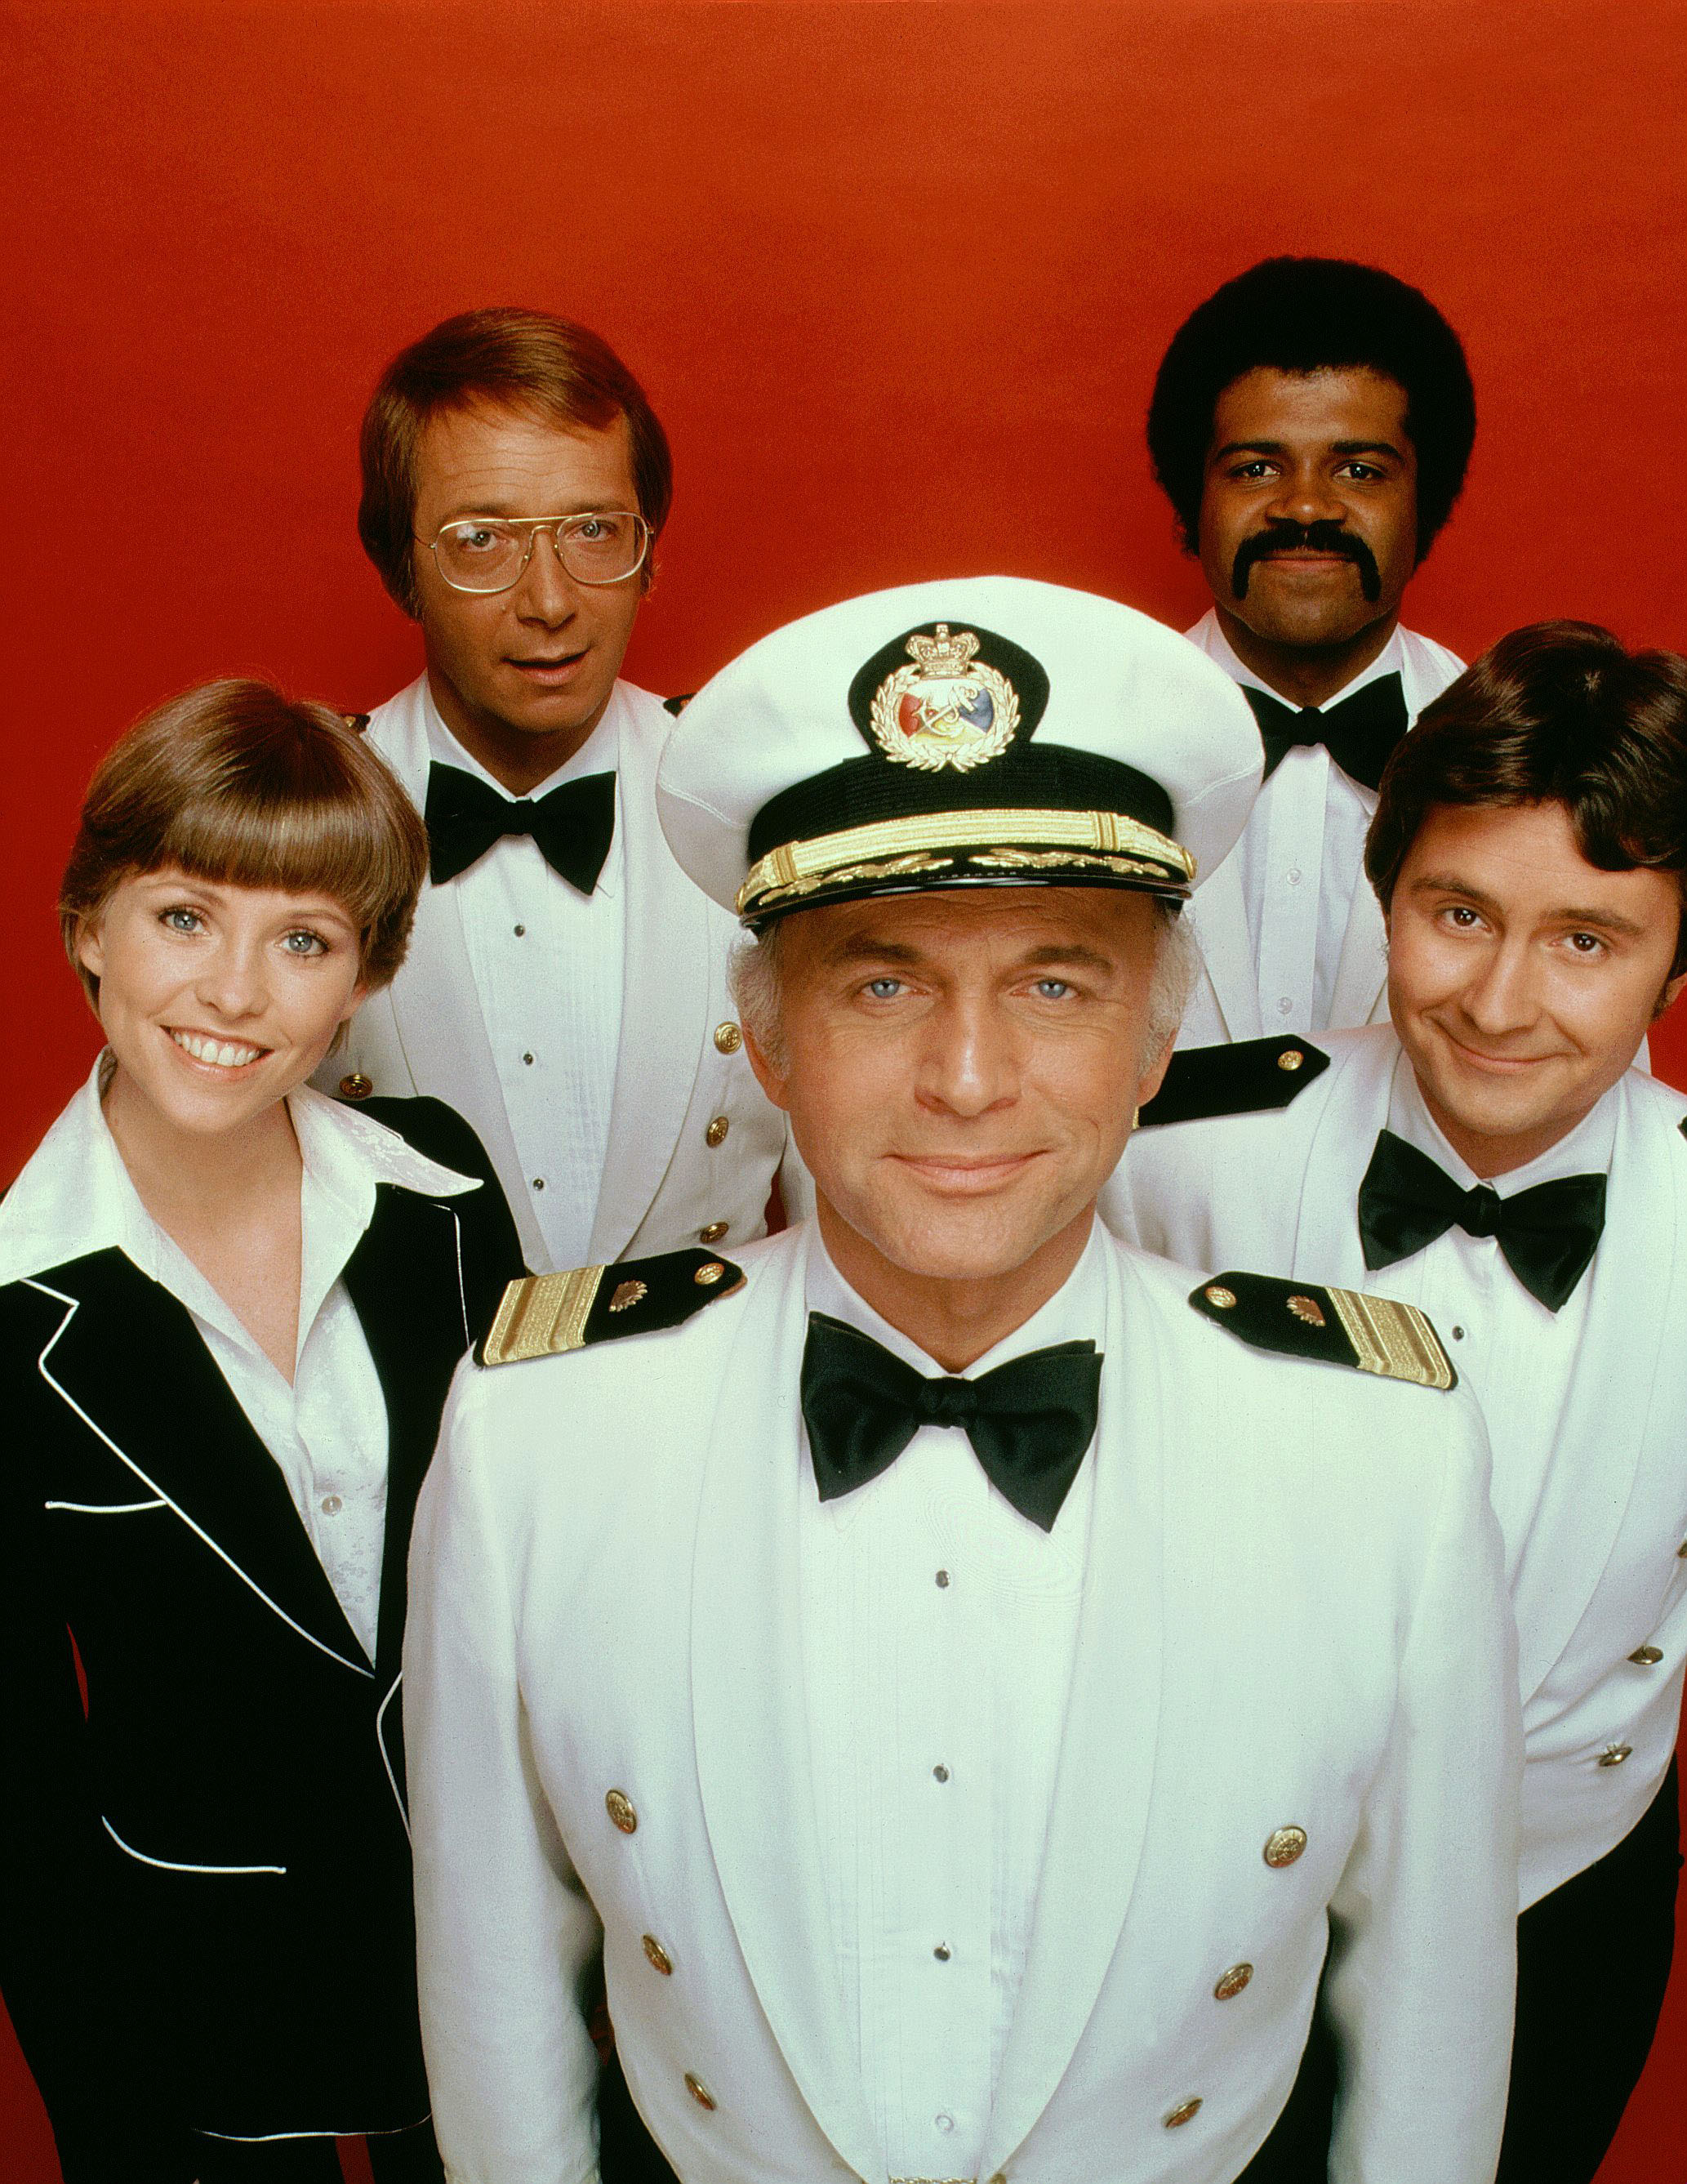 The Love Boat A Behind The Scenes Look At The Making Of The Show